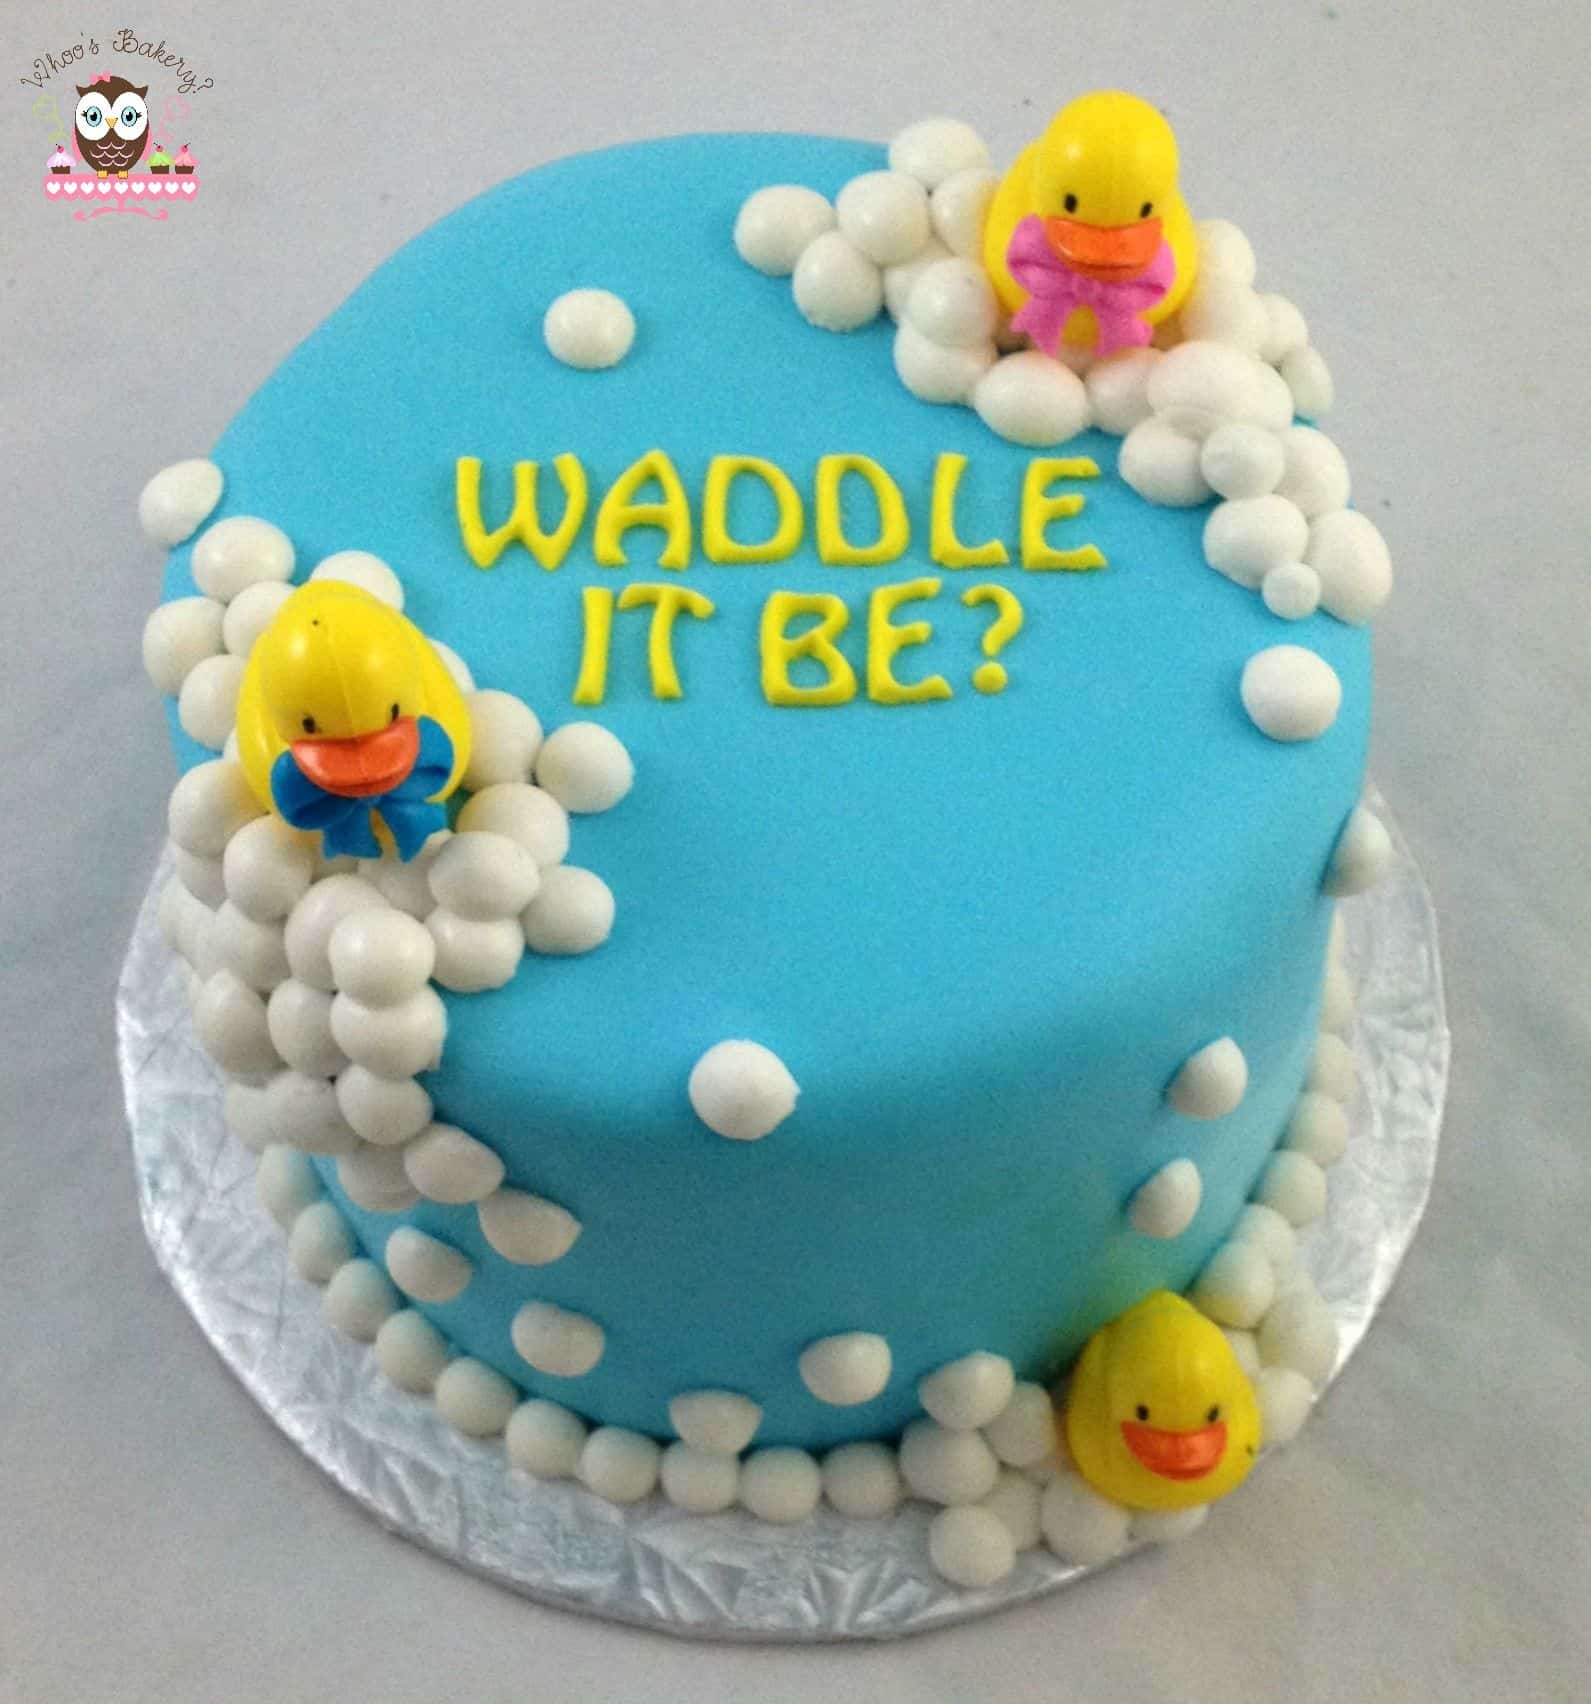 waddle it be cake, gender reveal cake, duck baby shower cake